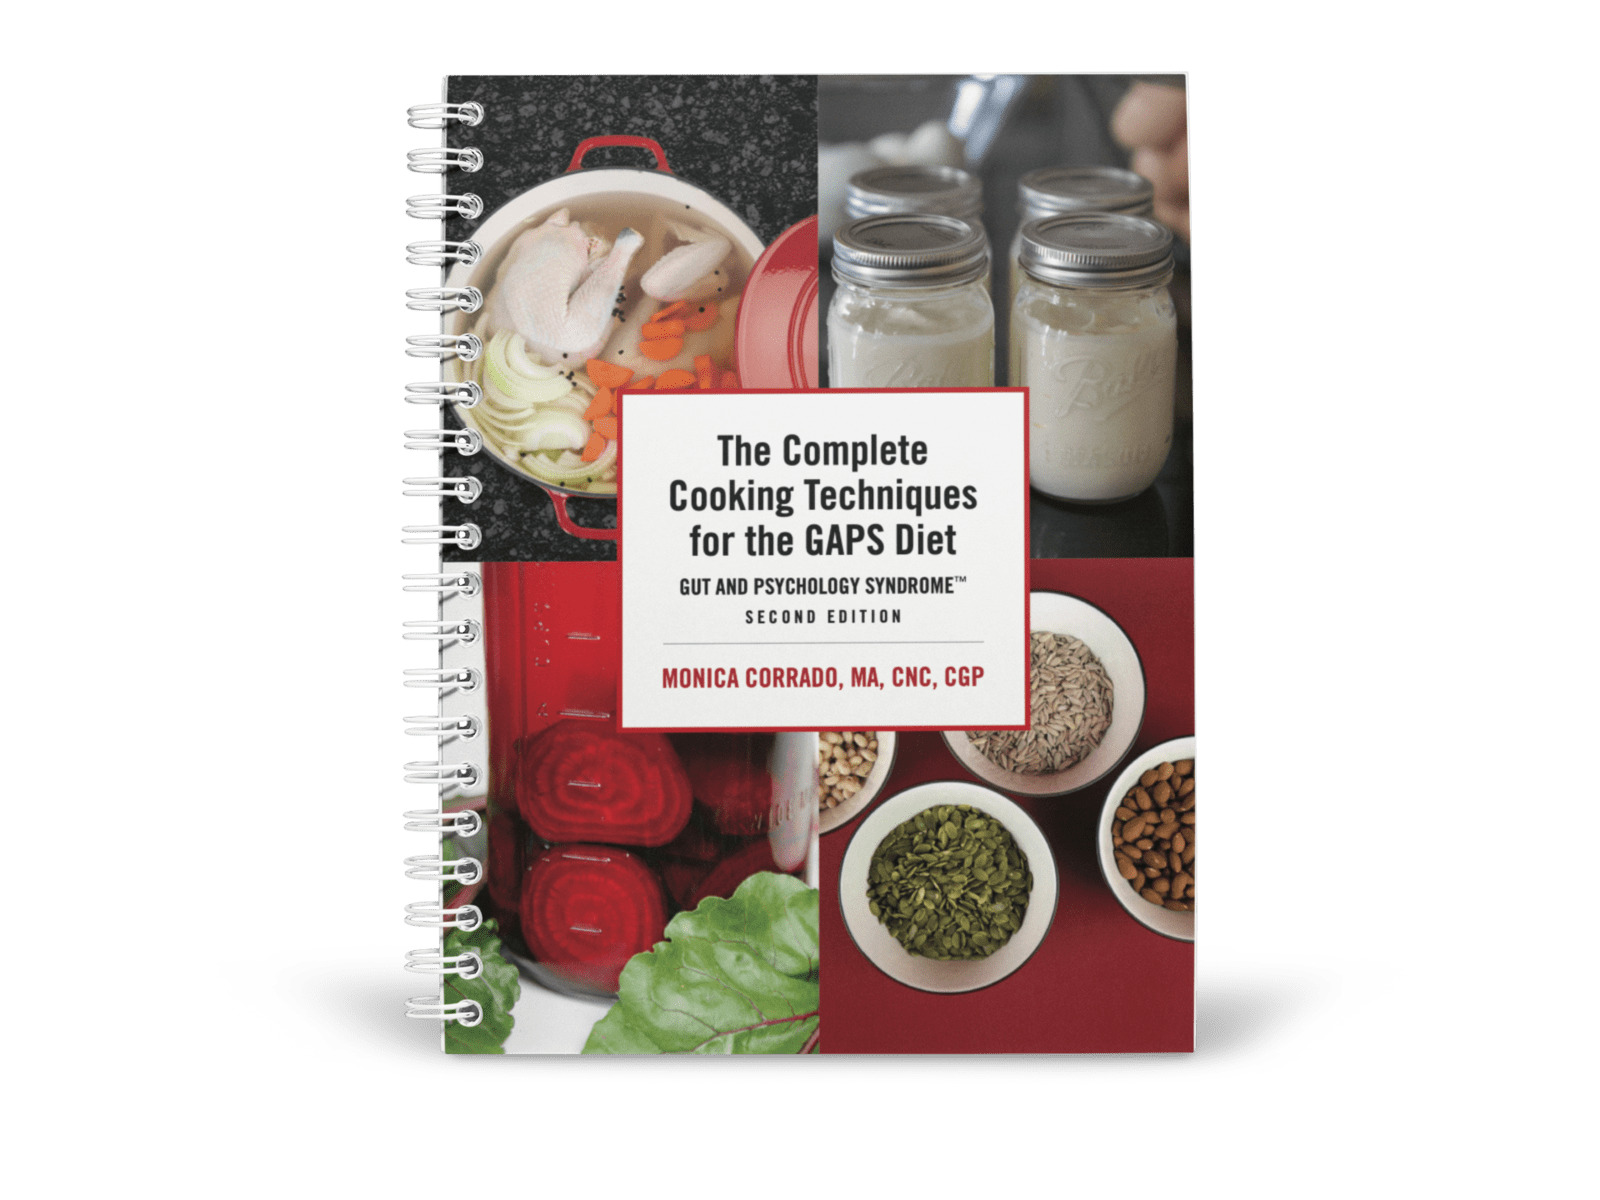 The Complete Cooking Techniques for the GAPS Diet Gut and Psychology Syndrome™ 2nd Edition